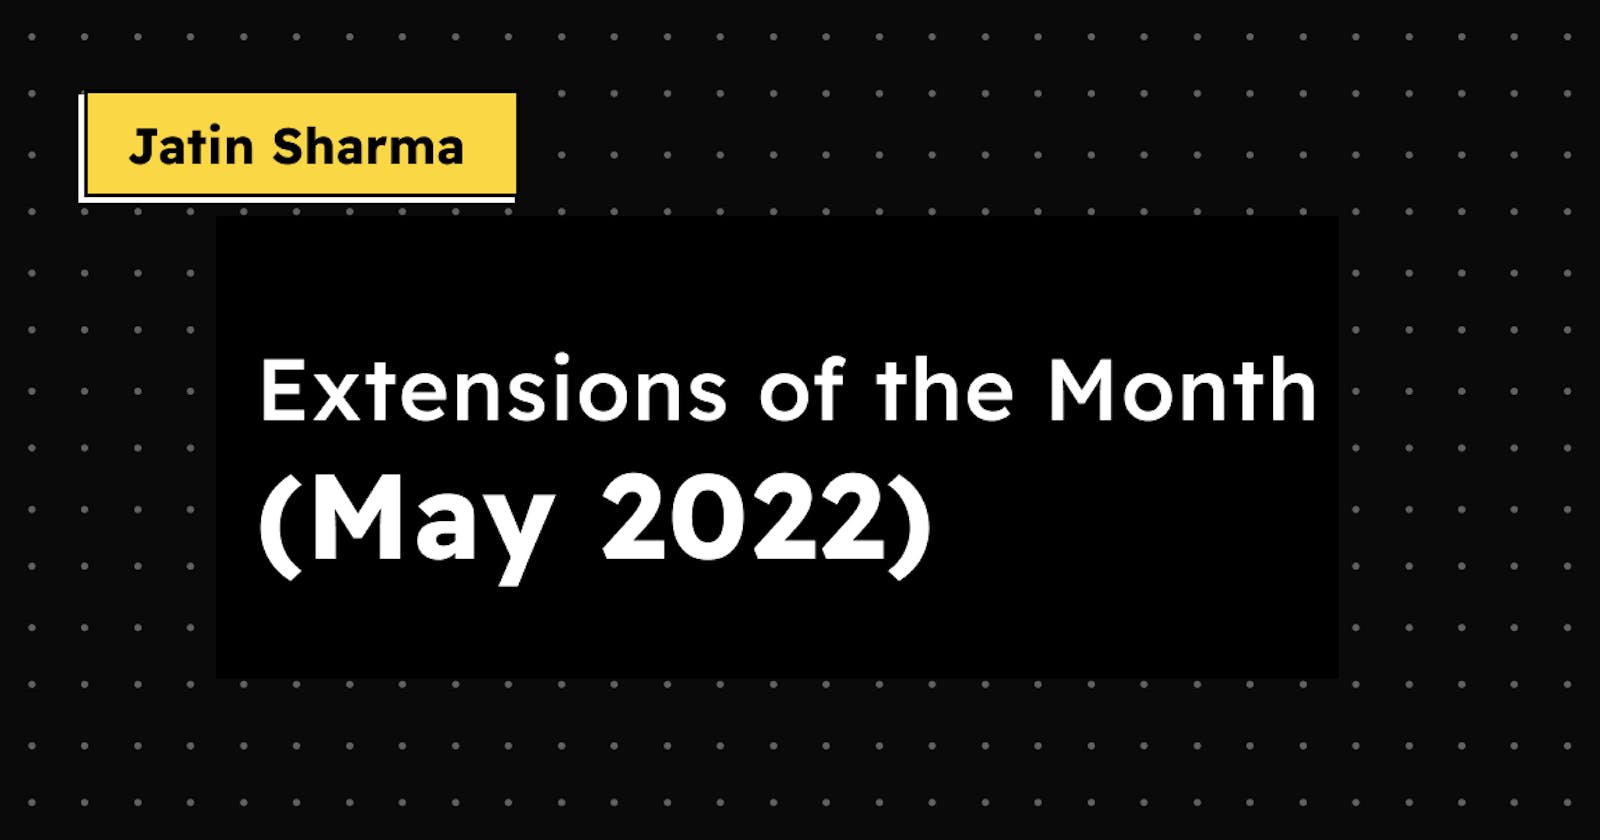 Extensions of the Month - May 2022